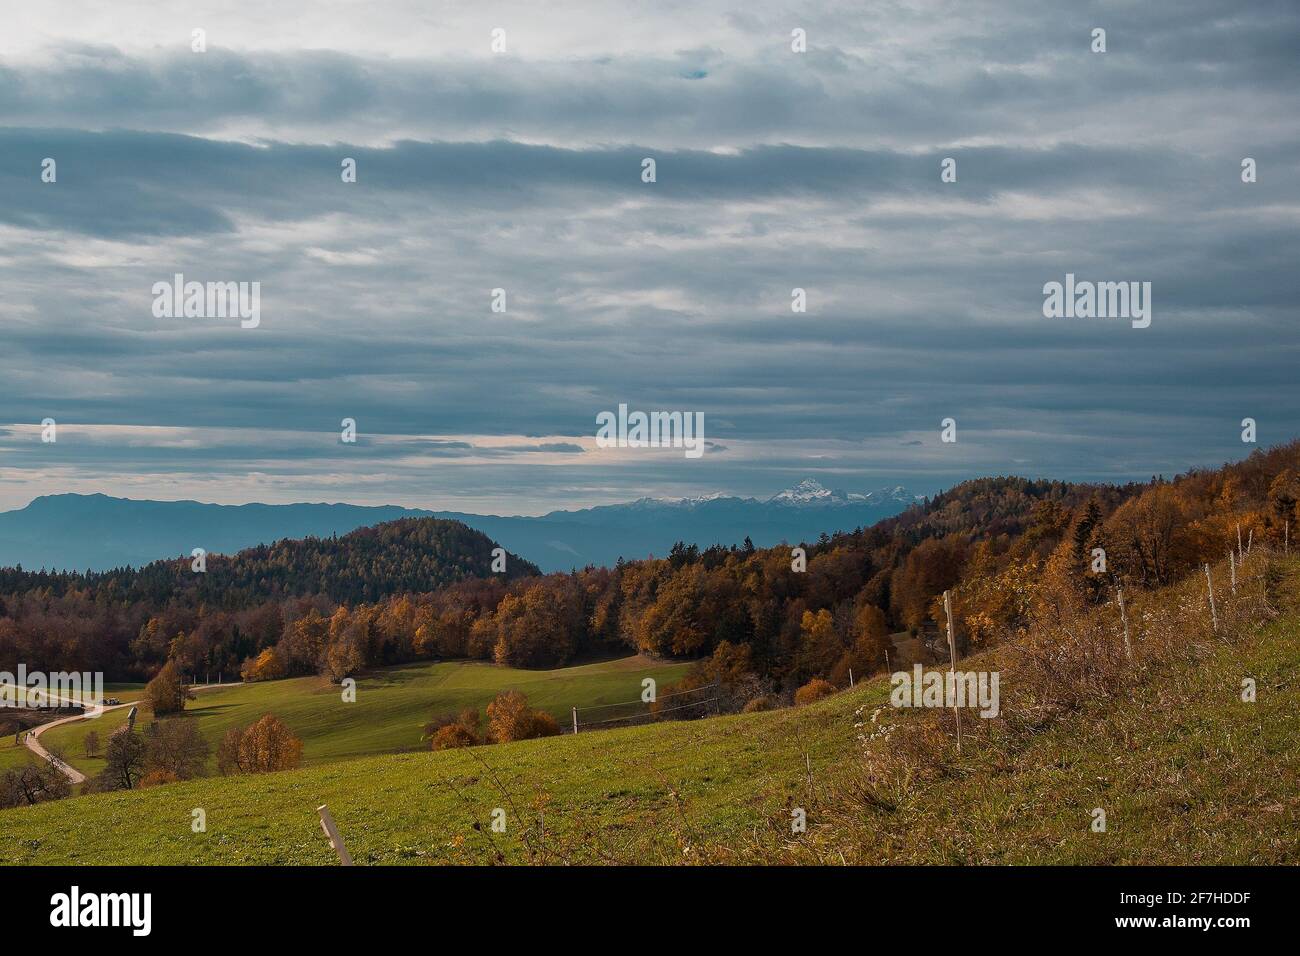 Autumn like meadows and beautiful sights towards the mountains in the distance. Stock Photo